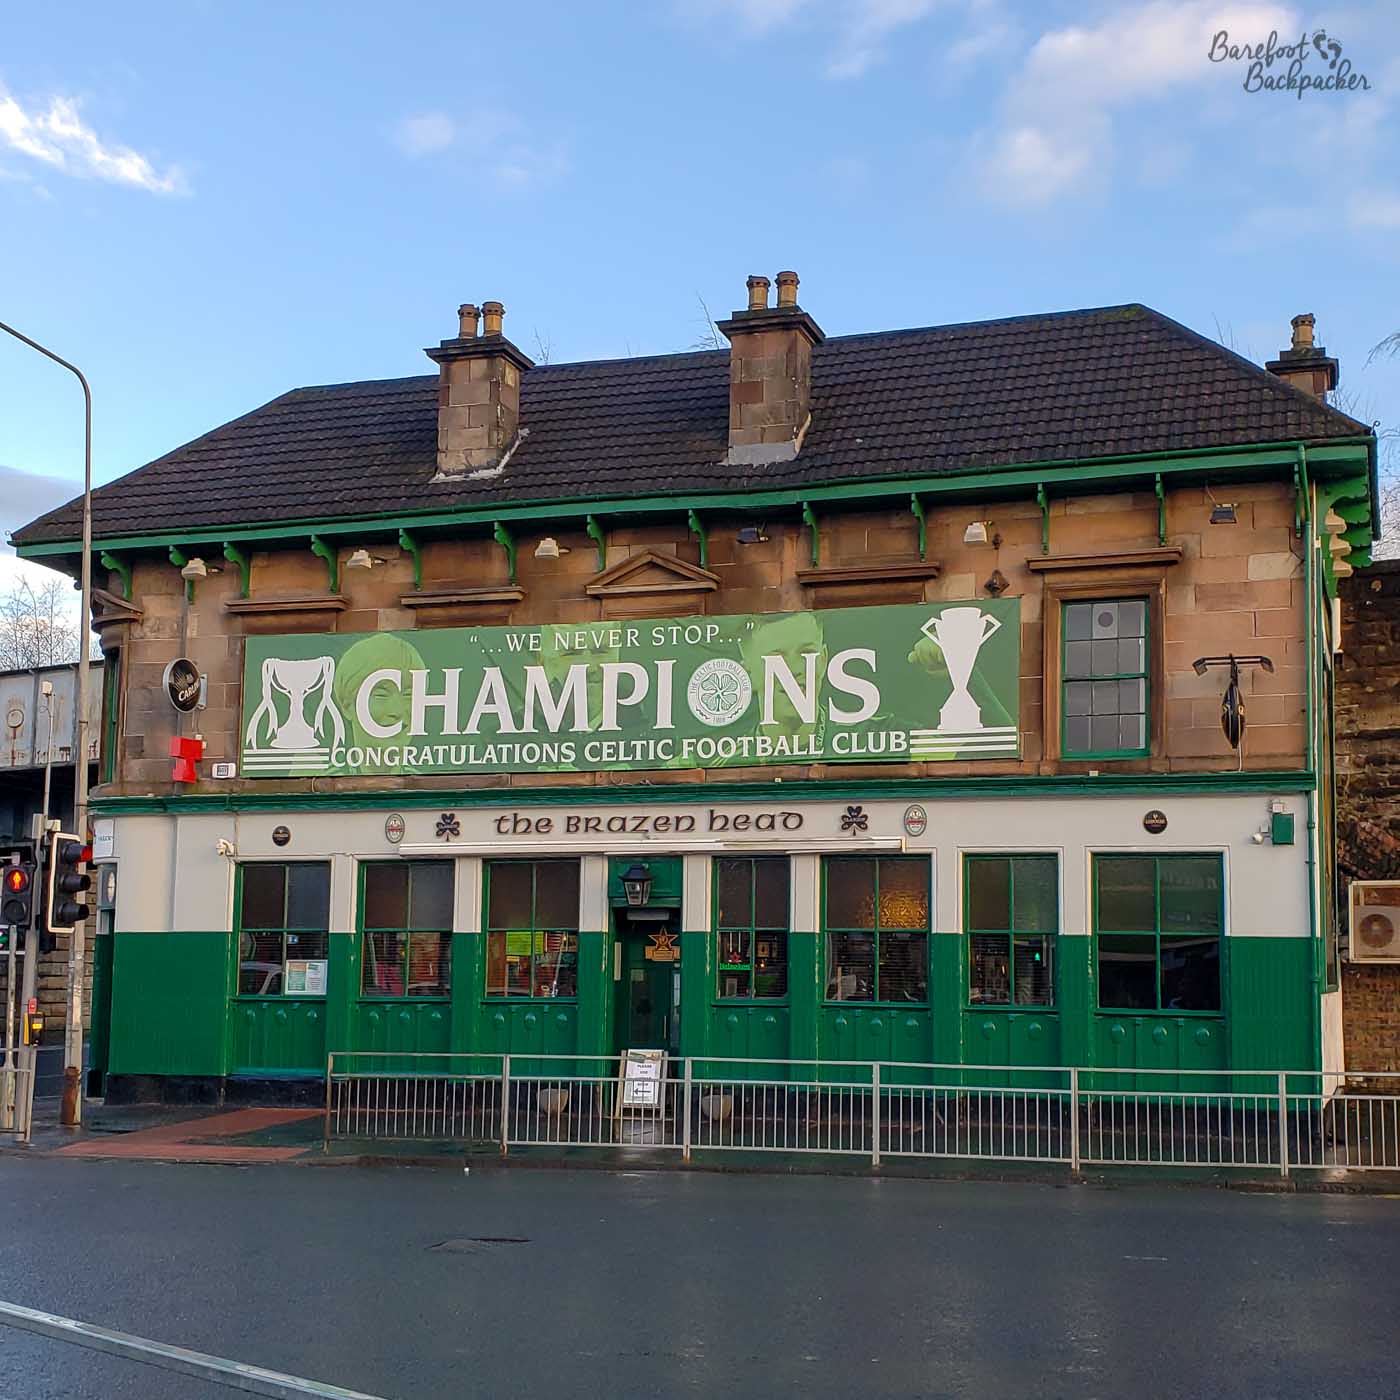 A long rectangular building, mostly painted green, with a large banner above the windows that congratulates Celtic Football Club for being Champions.